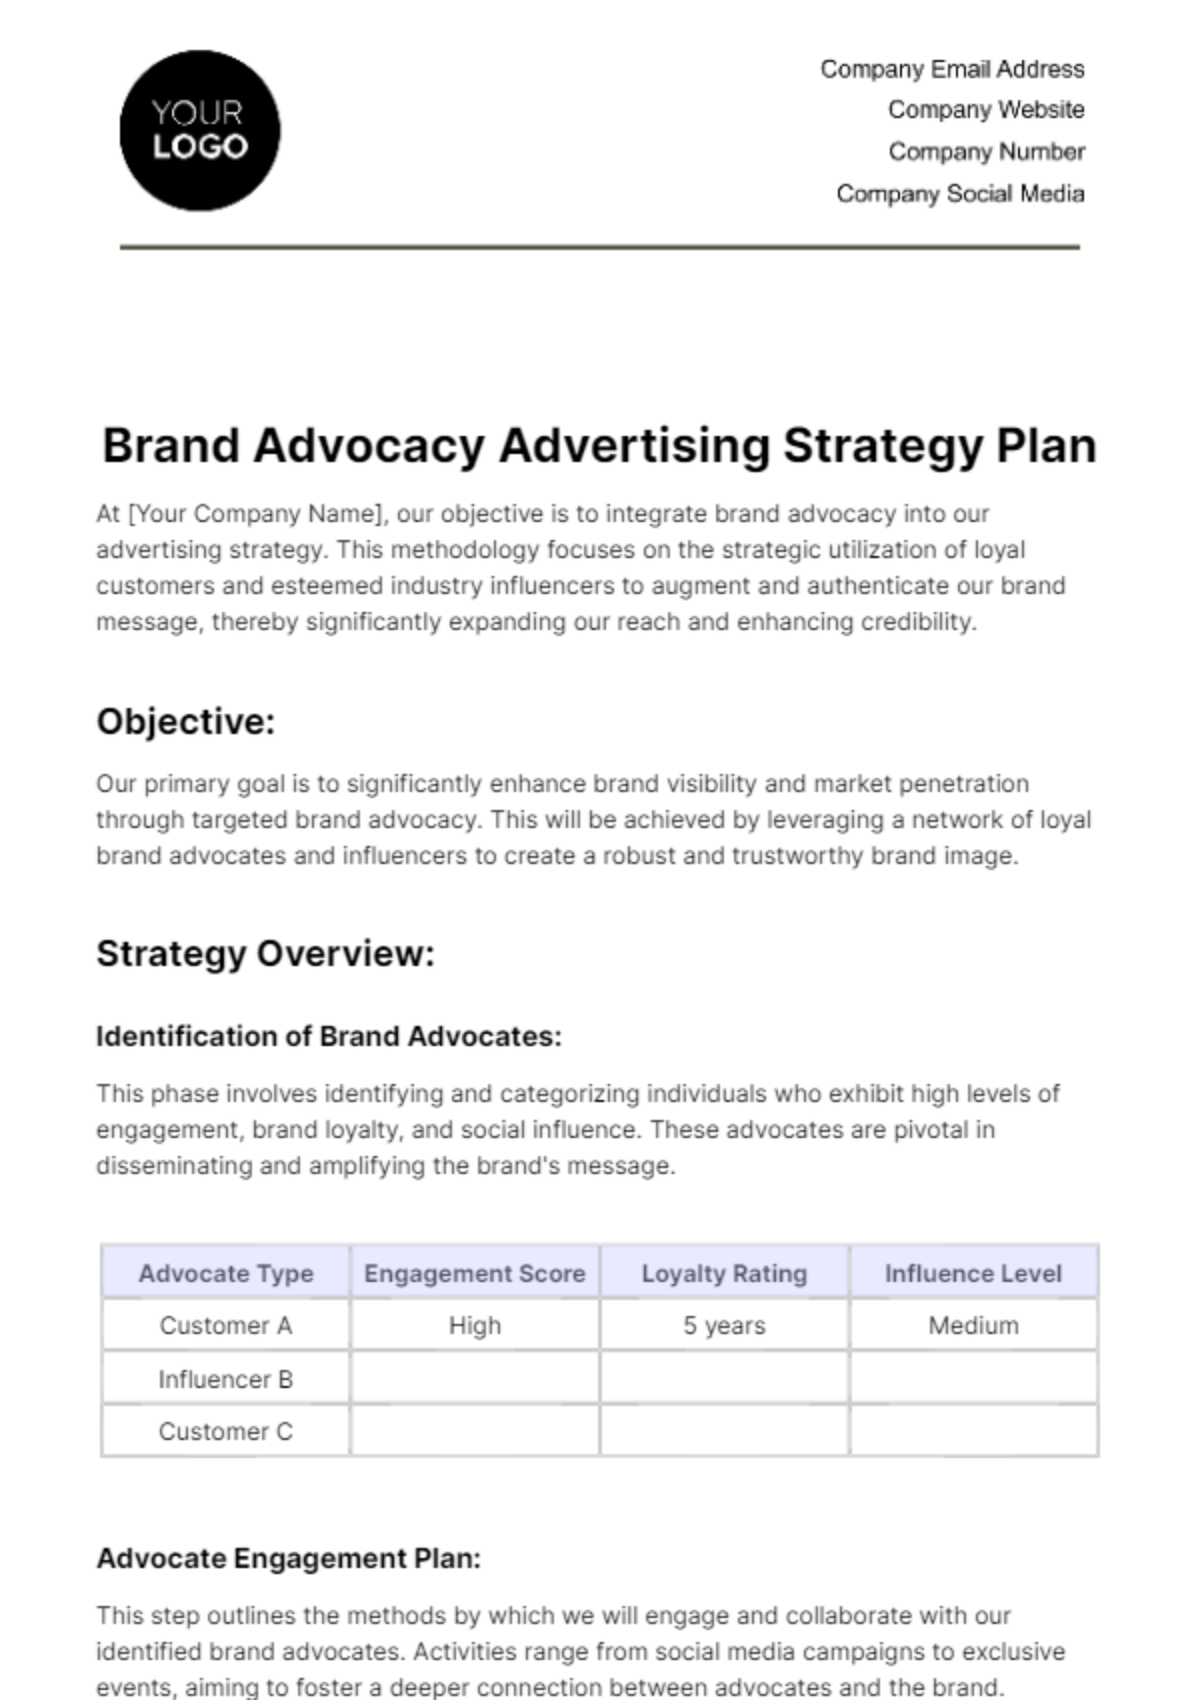 Brand Advocacy Advertising Strategy Plan Template